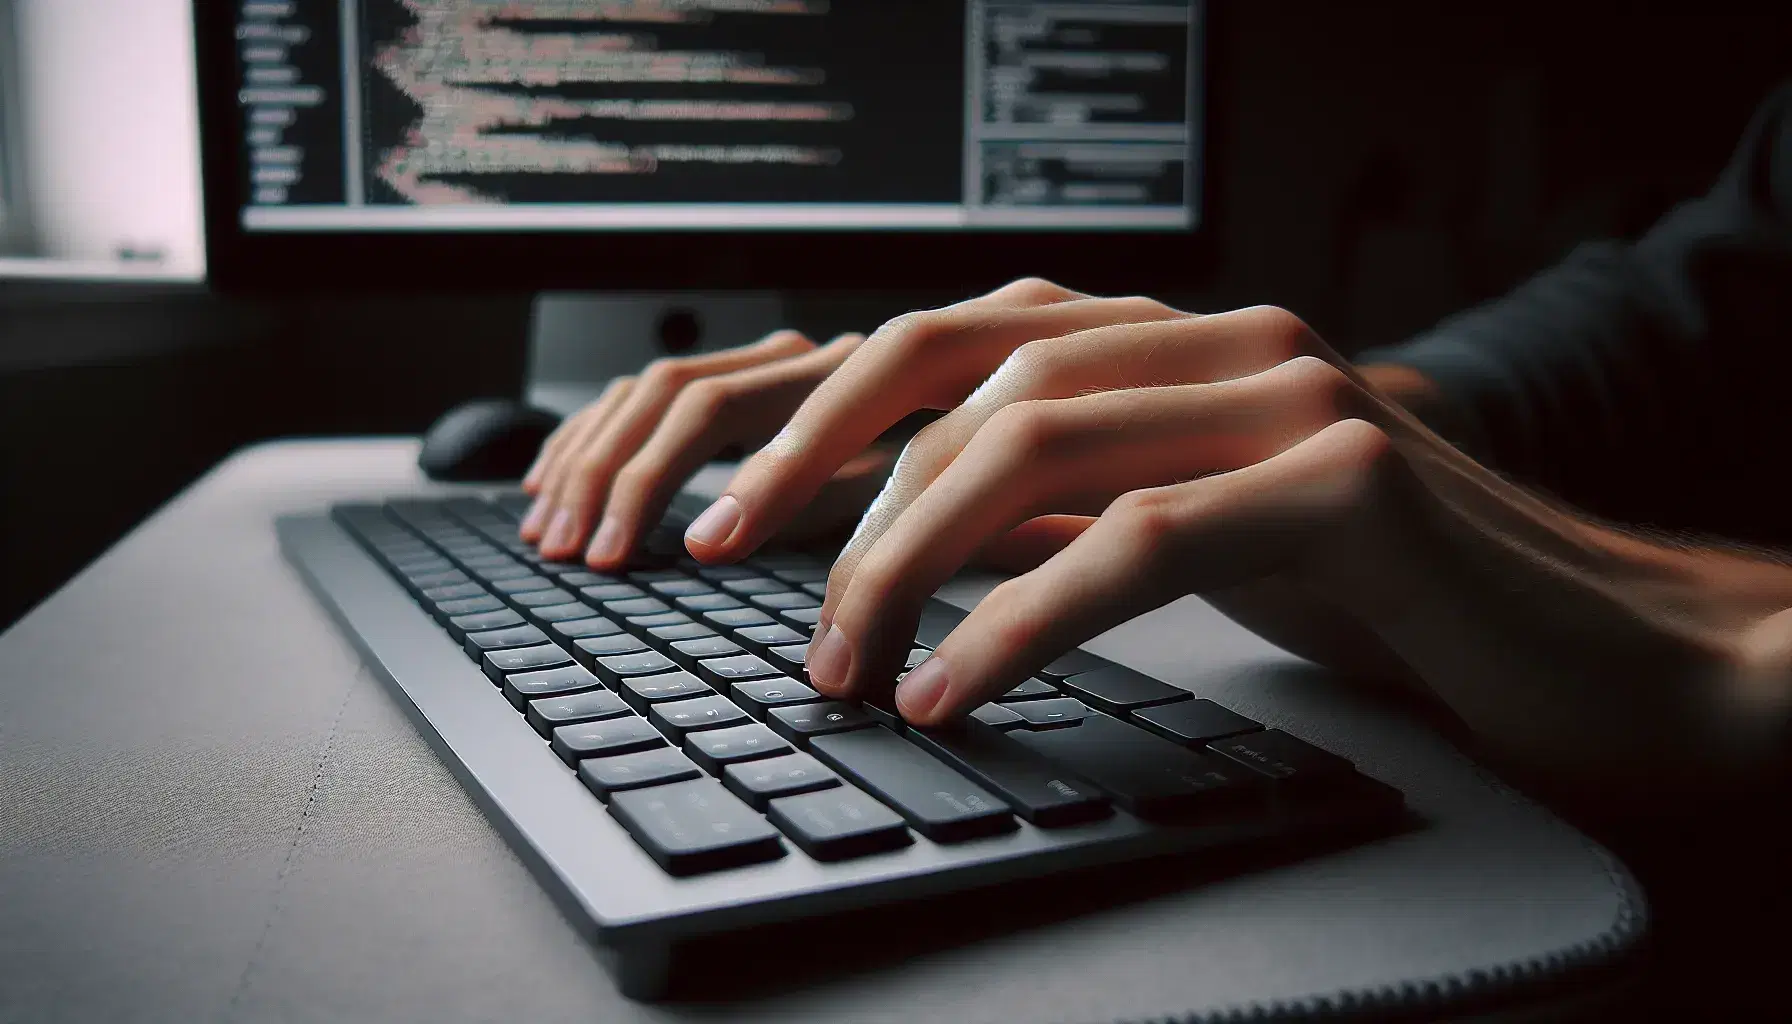 Hands of a person typing on a modern keyboard without markings with blurred background of a screen with Python code in an IDE.